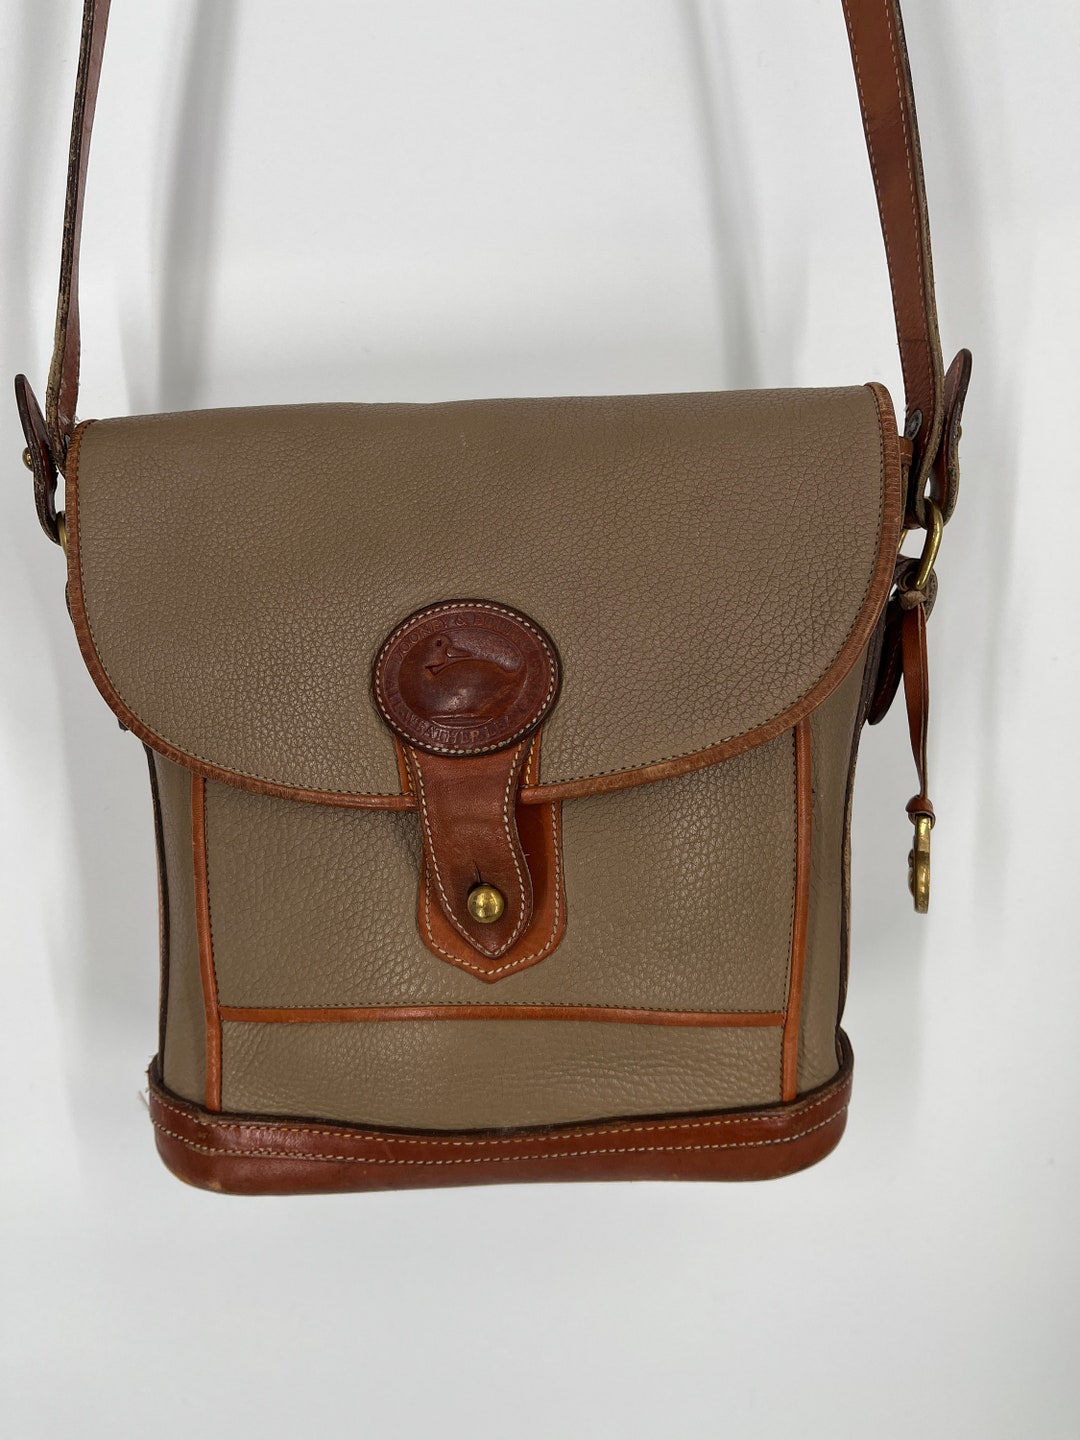 Vintage Rare Dooney and Bourke Taupe Dover Bag Made in